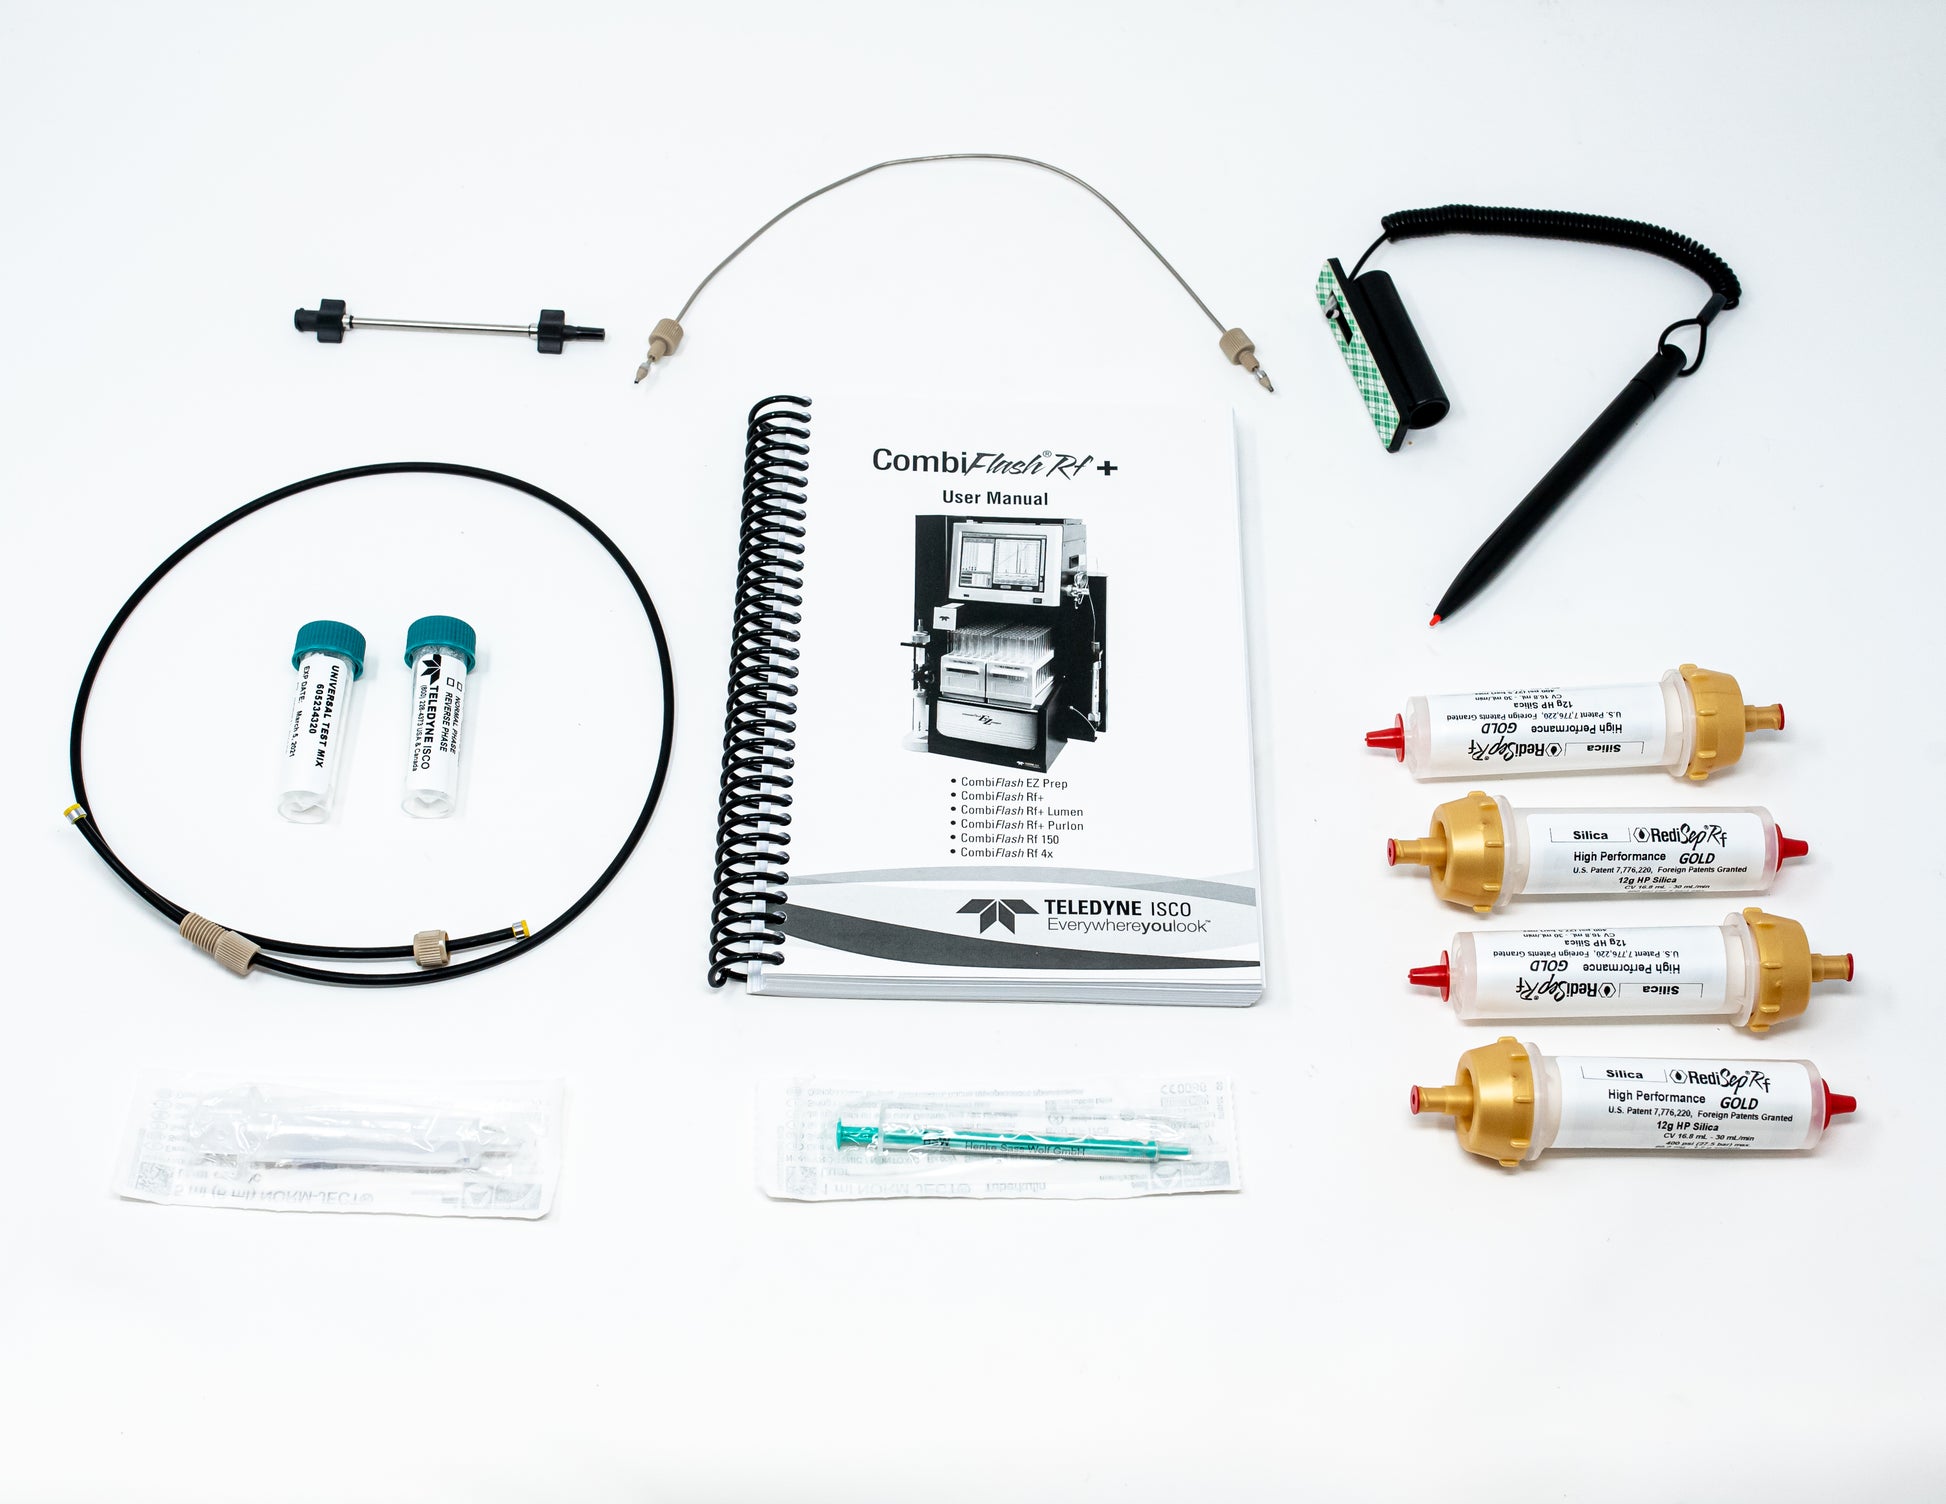 Prime Tube Assembly, Stylus with tether, Inject valve, tubing, Universal verification kit